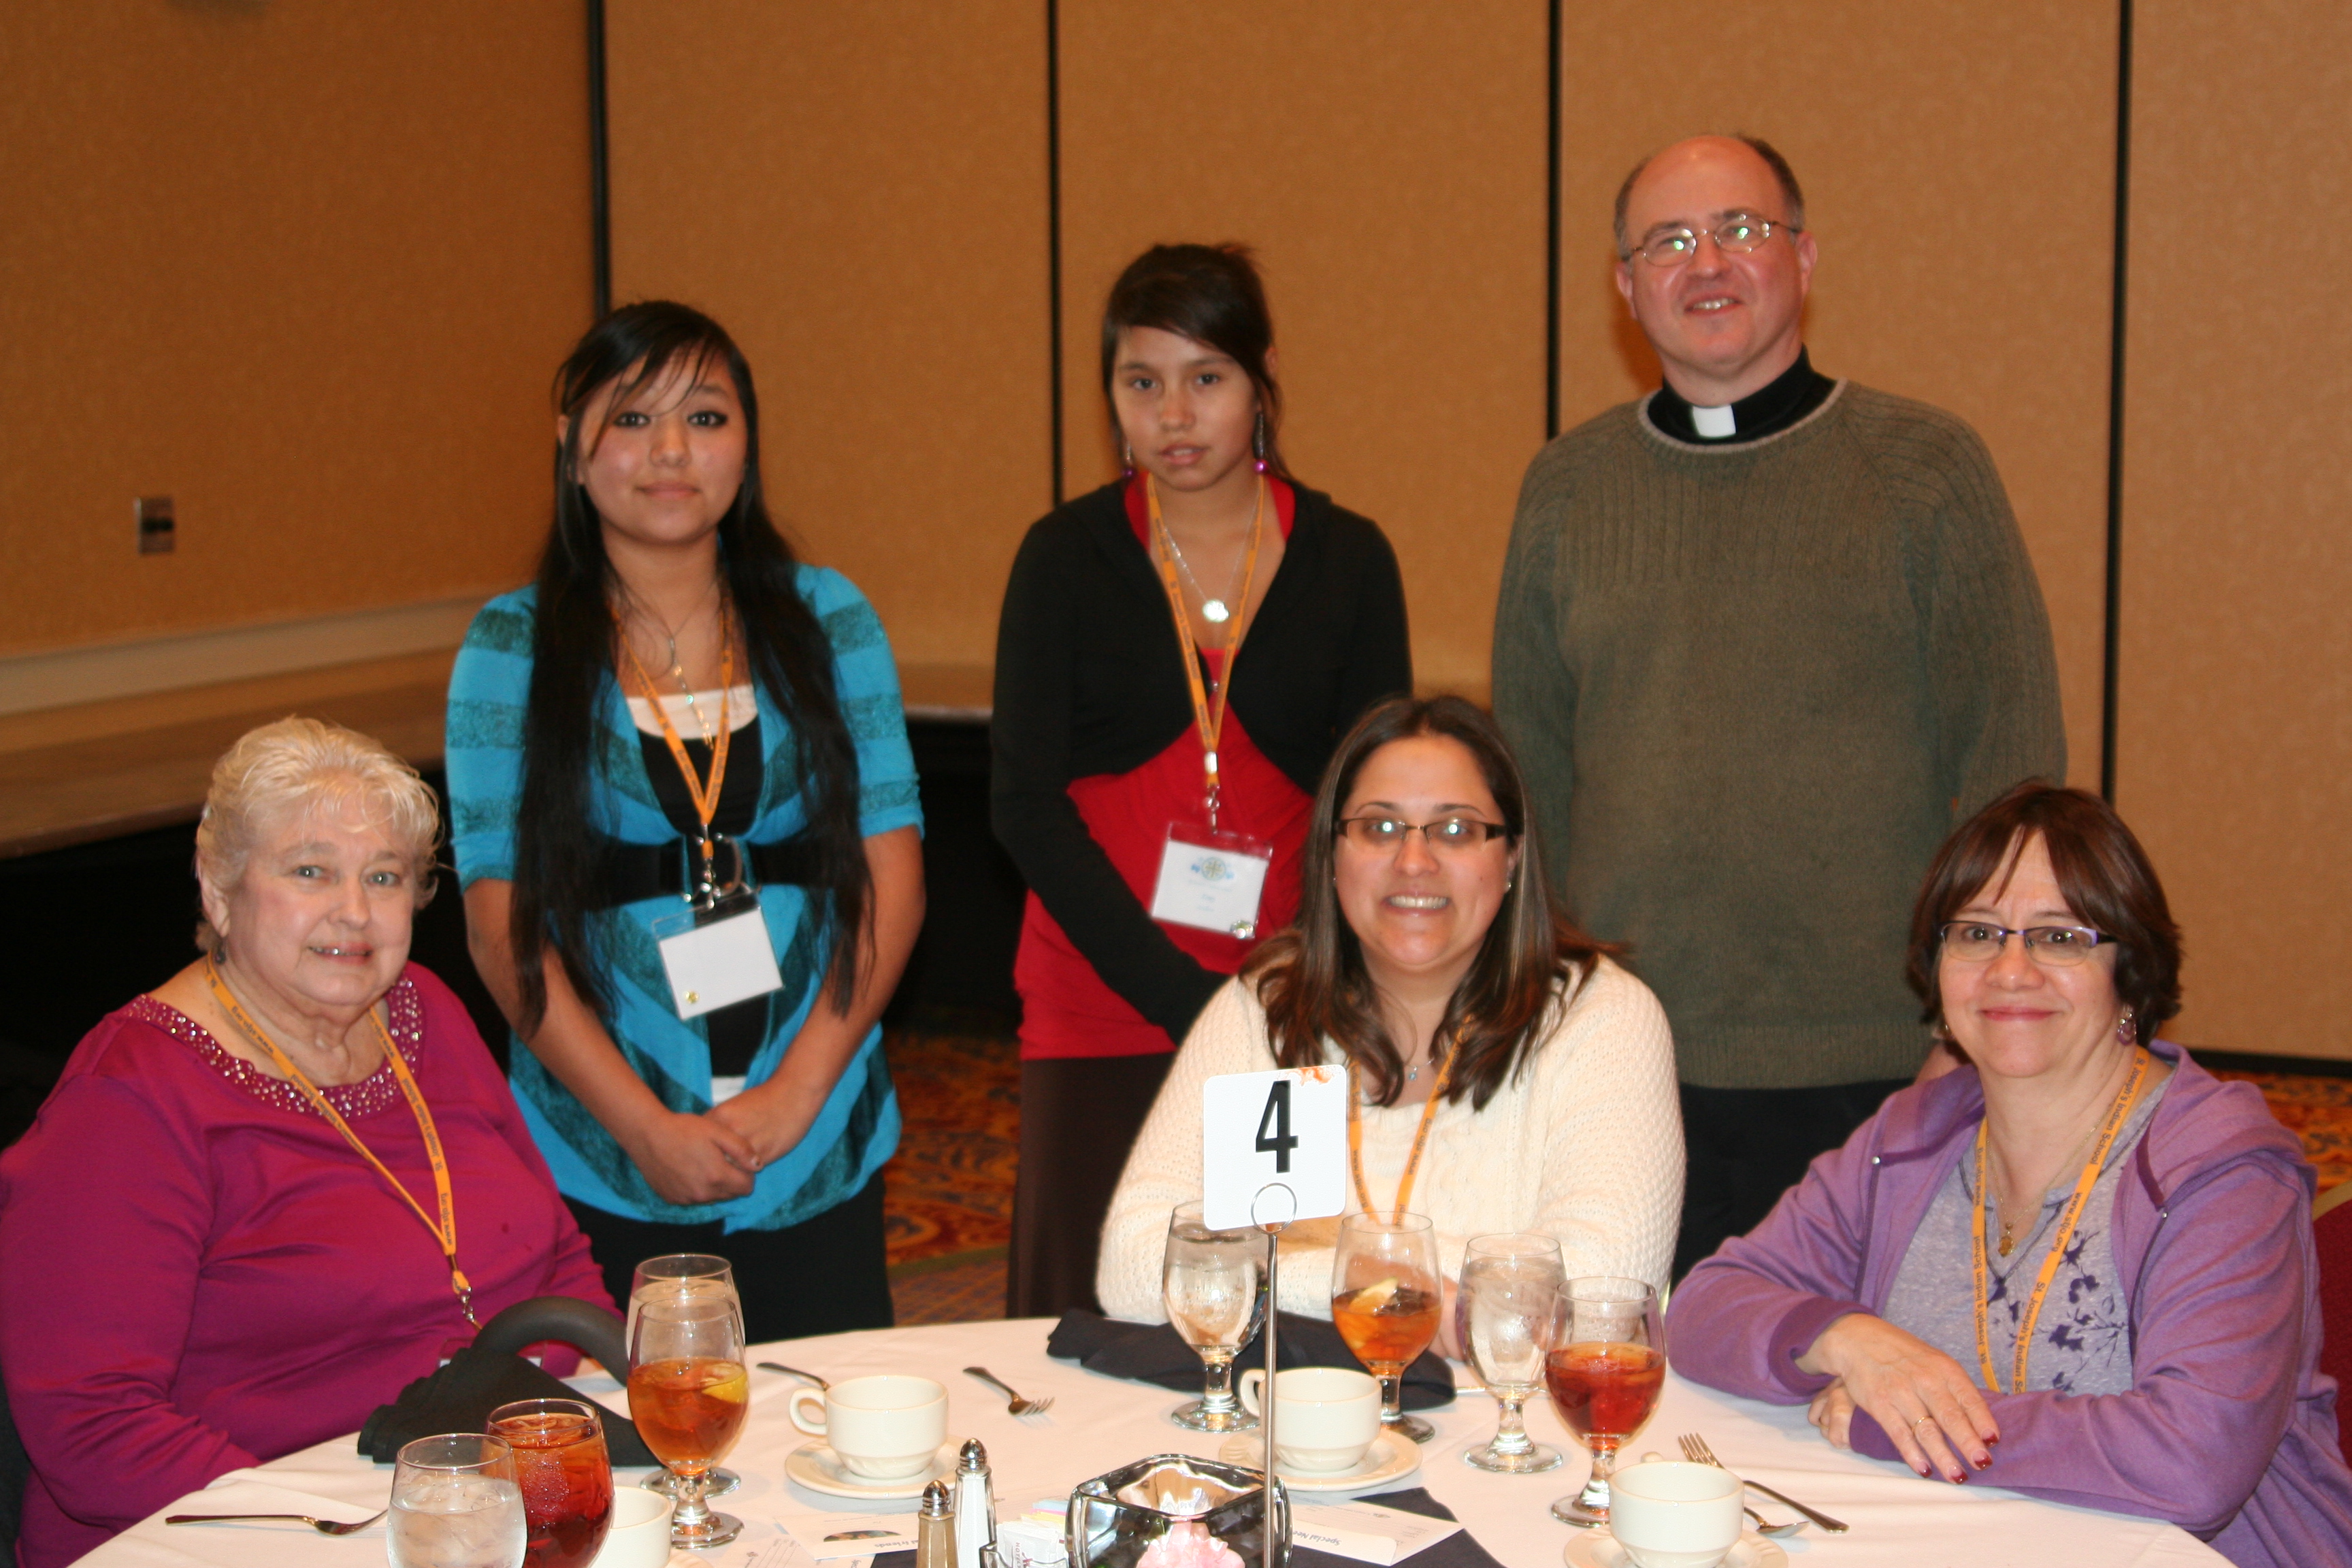 Mia, Zoey, Fr. Steve and friends at the California donor luncheon.